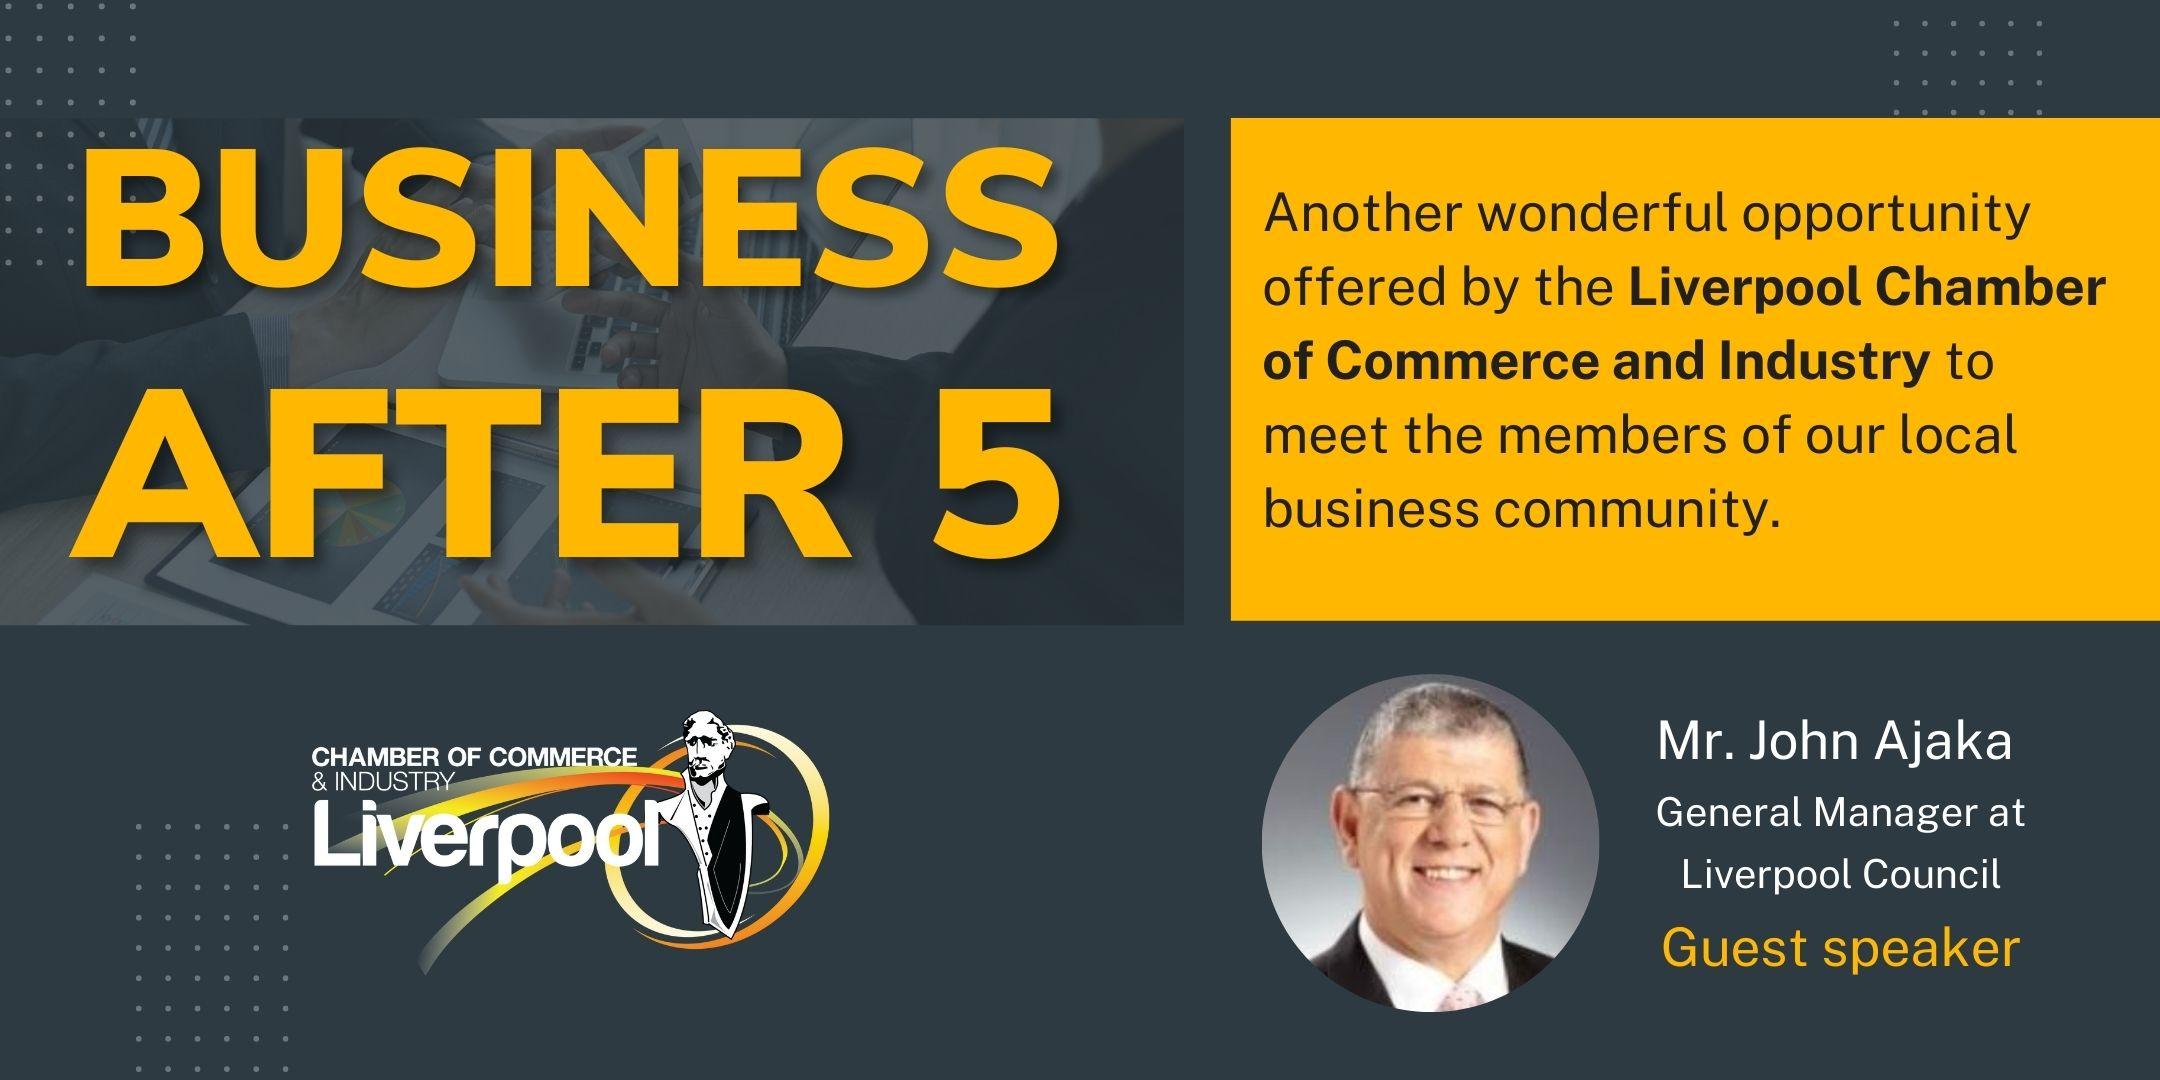 Business After 5 - Liverpool Chamber of Commerce and Industry